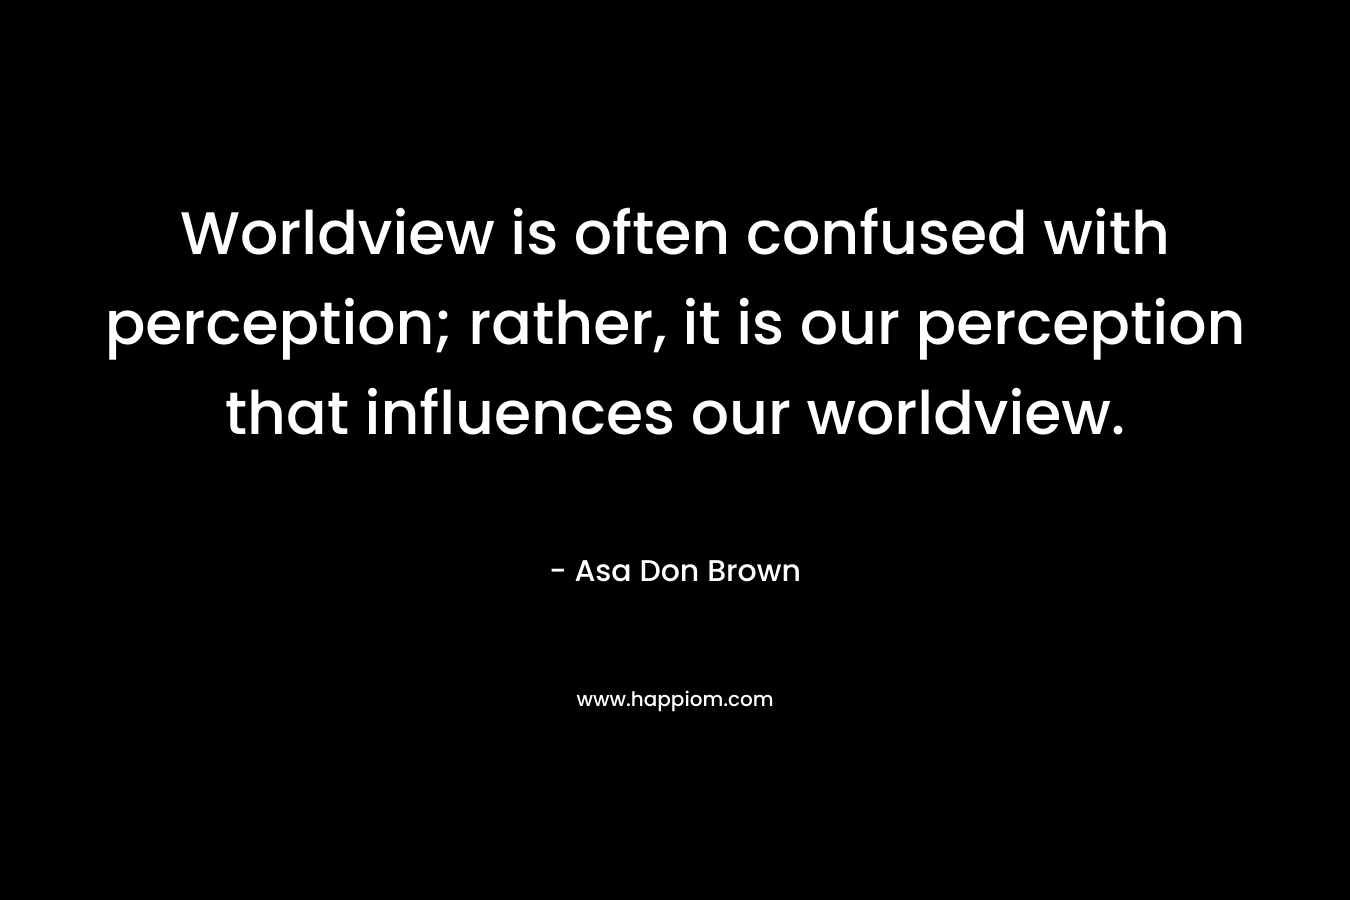 Worldview is often confused with perception; rather, it is our perception that influences our worldview. – Asa Don Brown